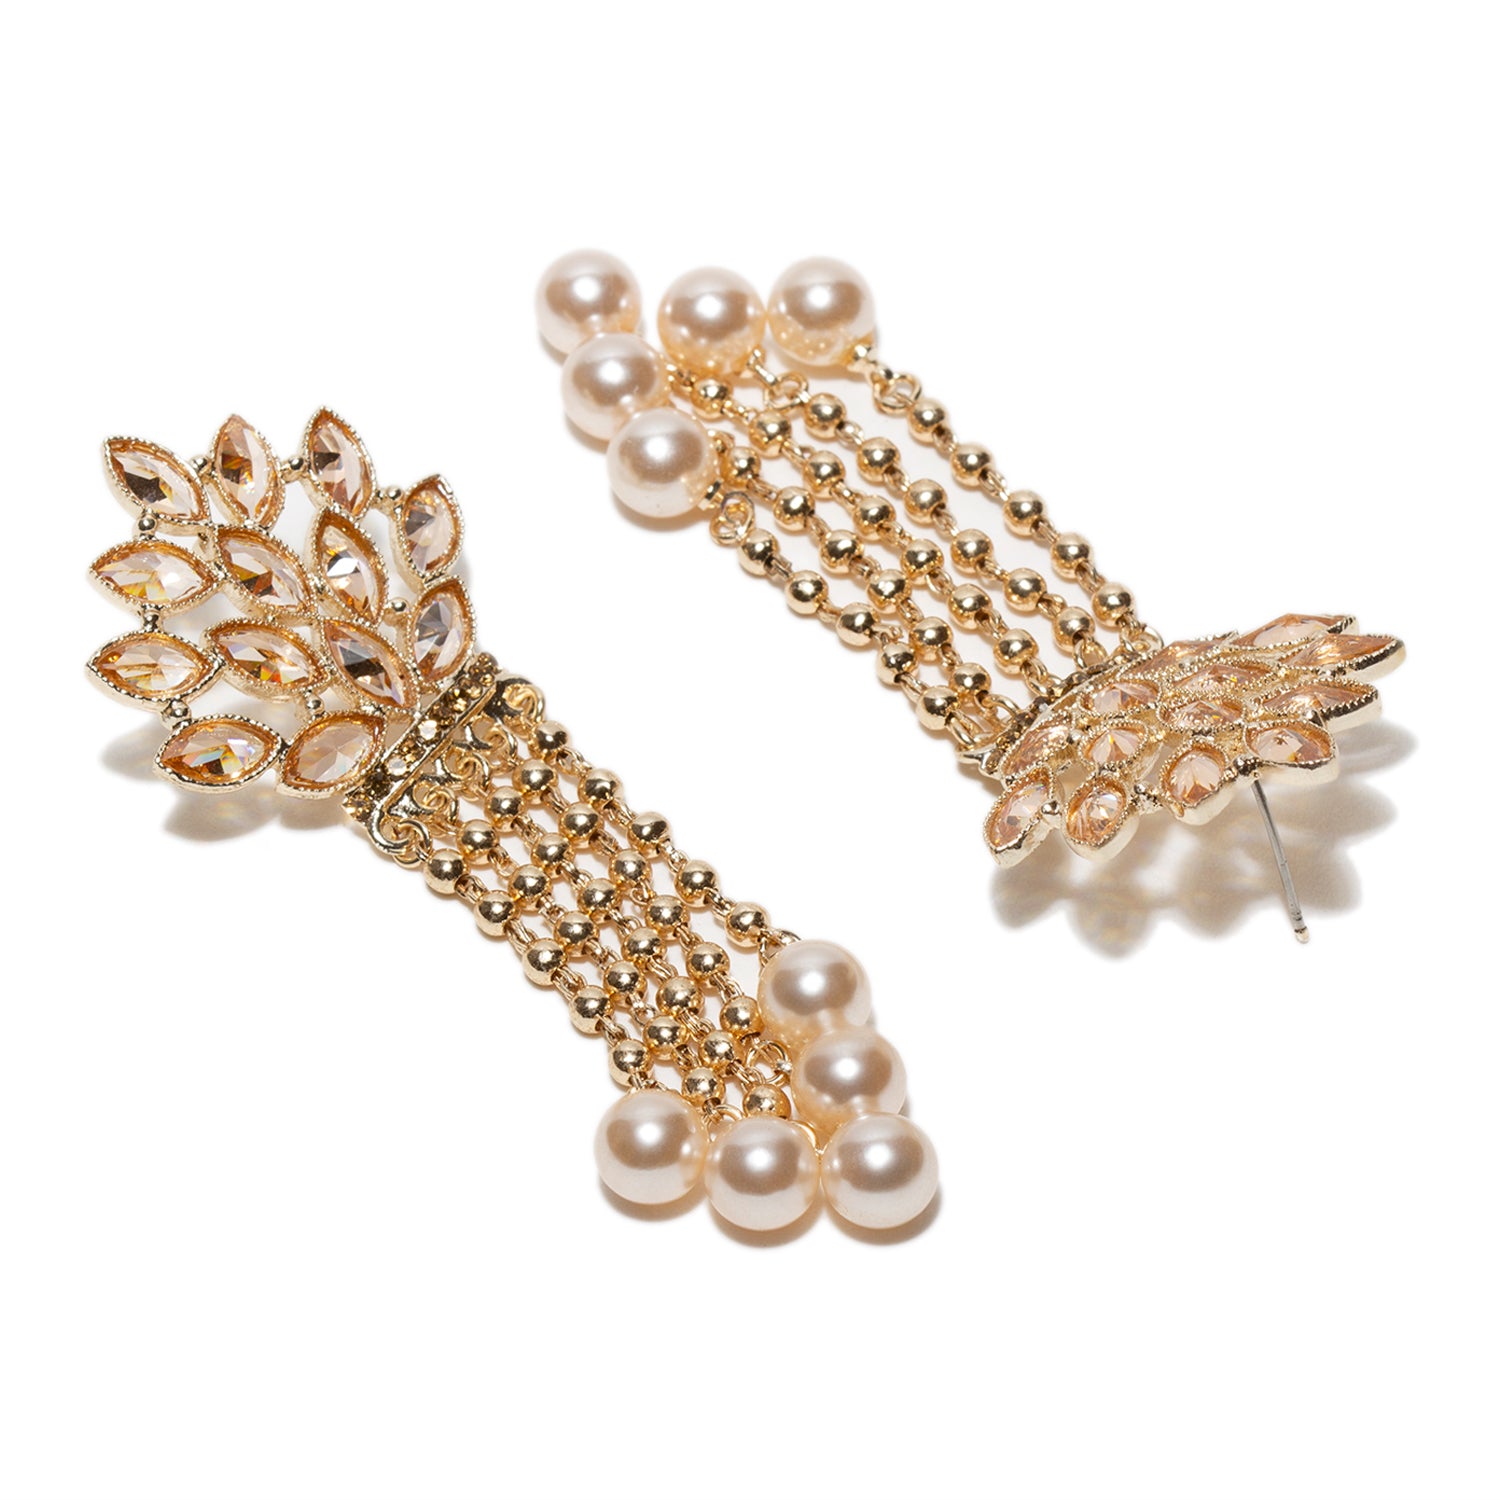 Buy quality 22k Gold Round Shape Tops Latkan Earring in Ahmedabad